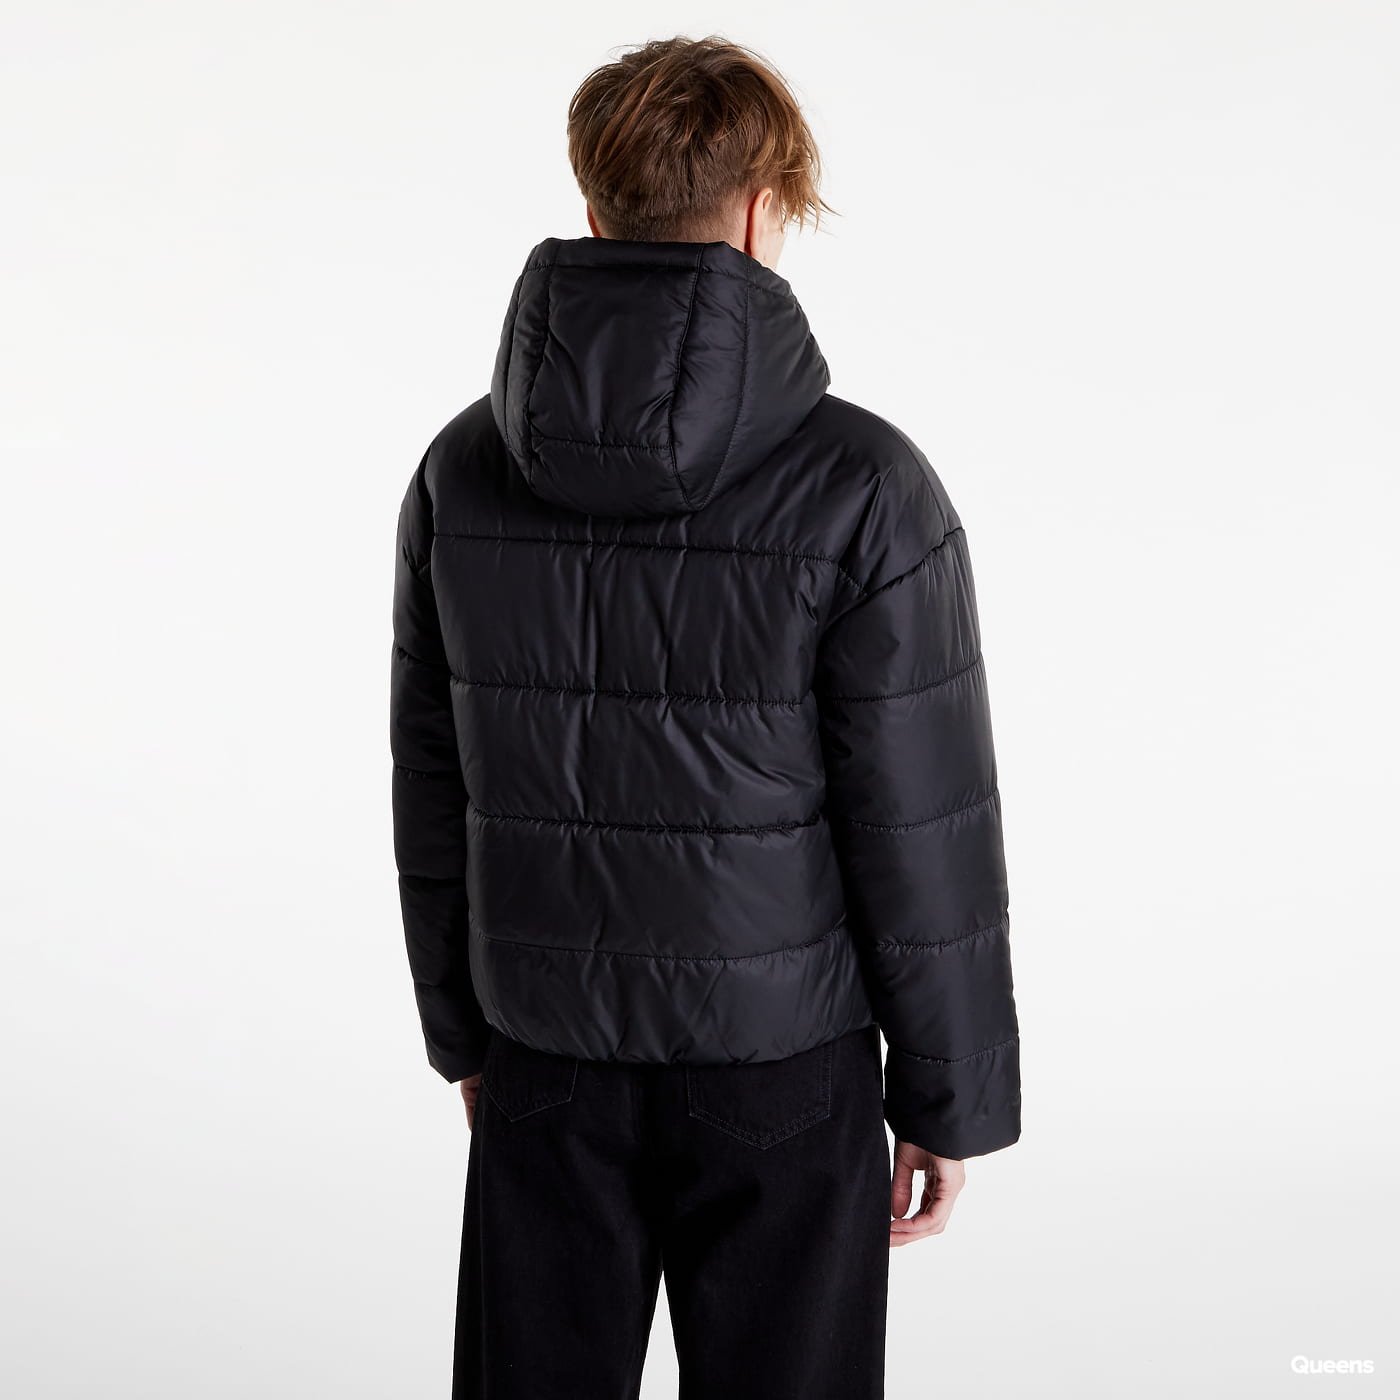 Therma-FIT Repel Synthetic-Fill Hooded Jacket